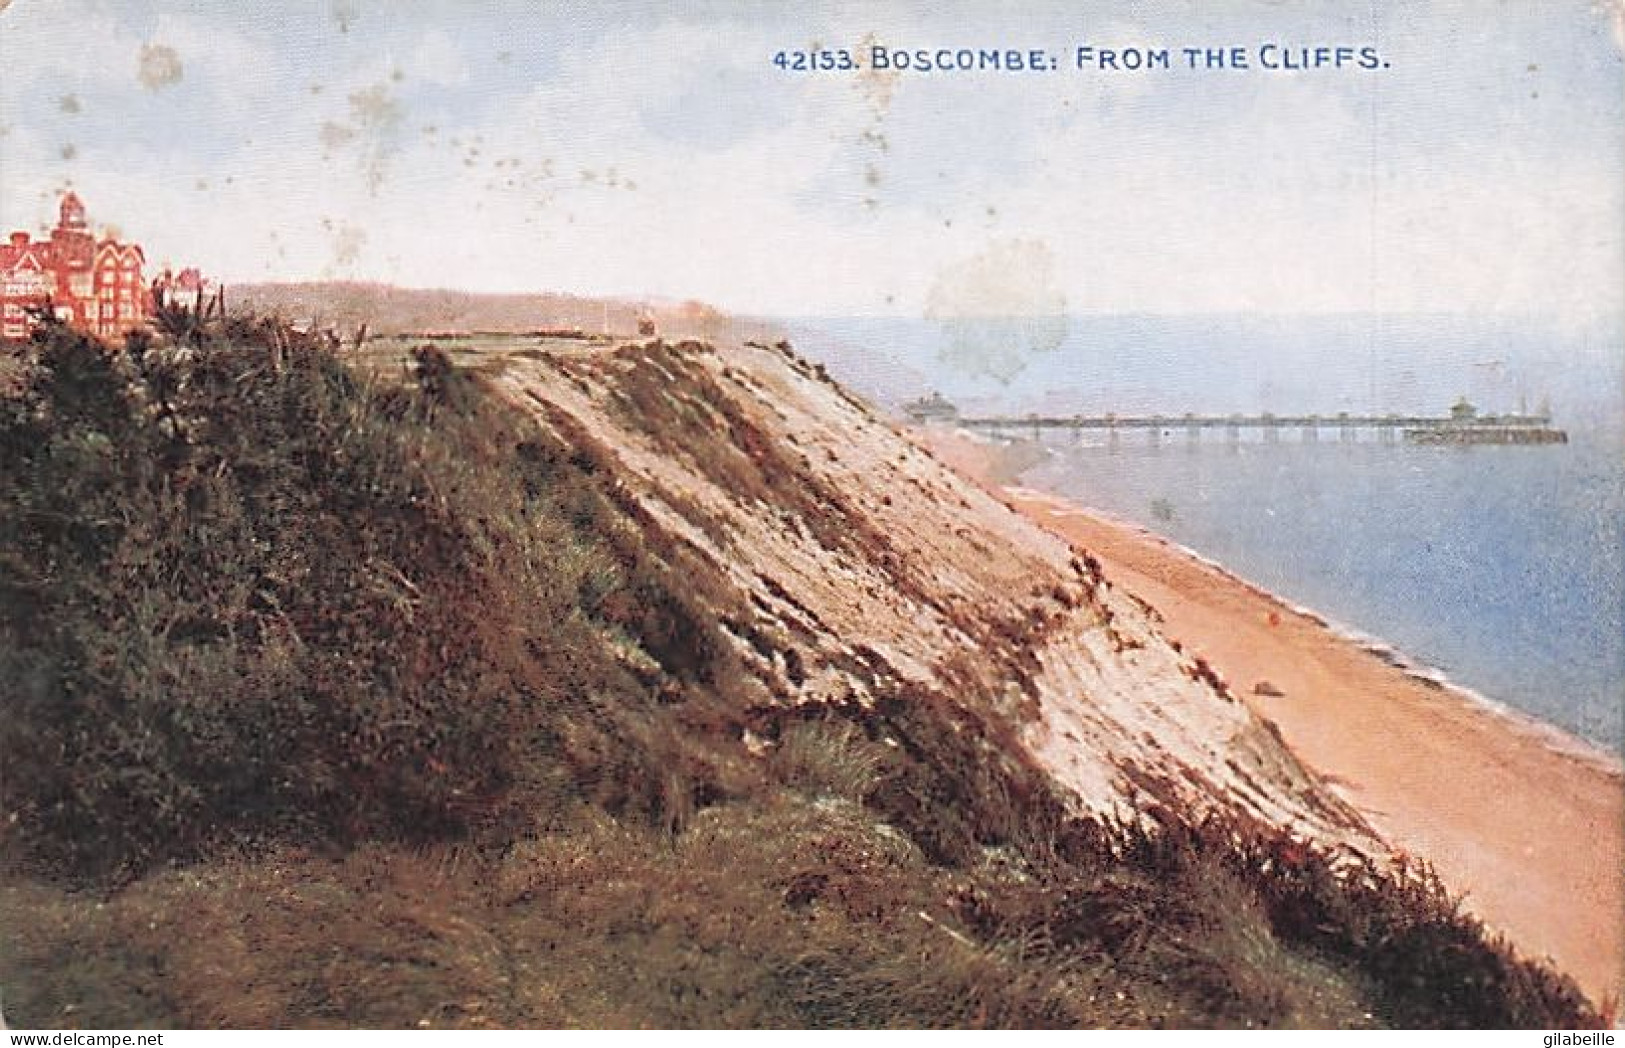  Bournemouth   - Boscombe  From The Cliffs - Bournemouth (from 1972)